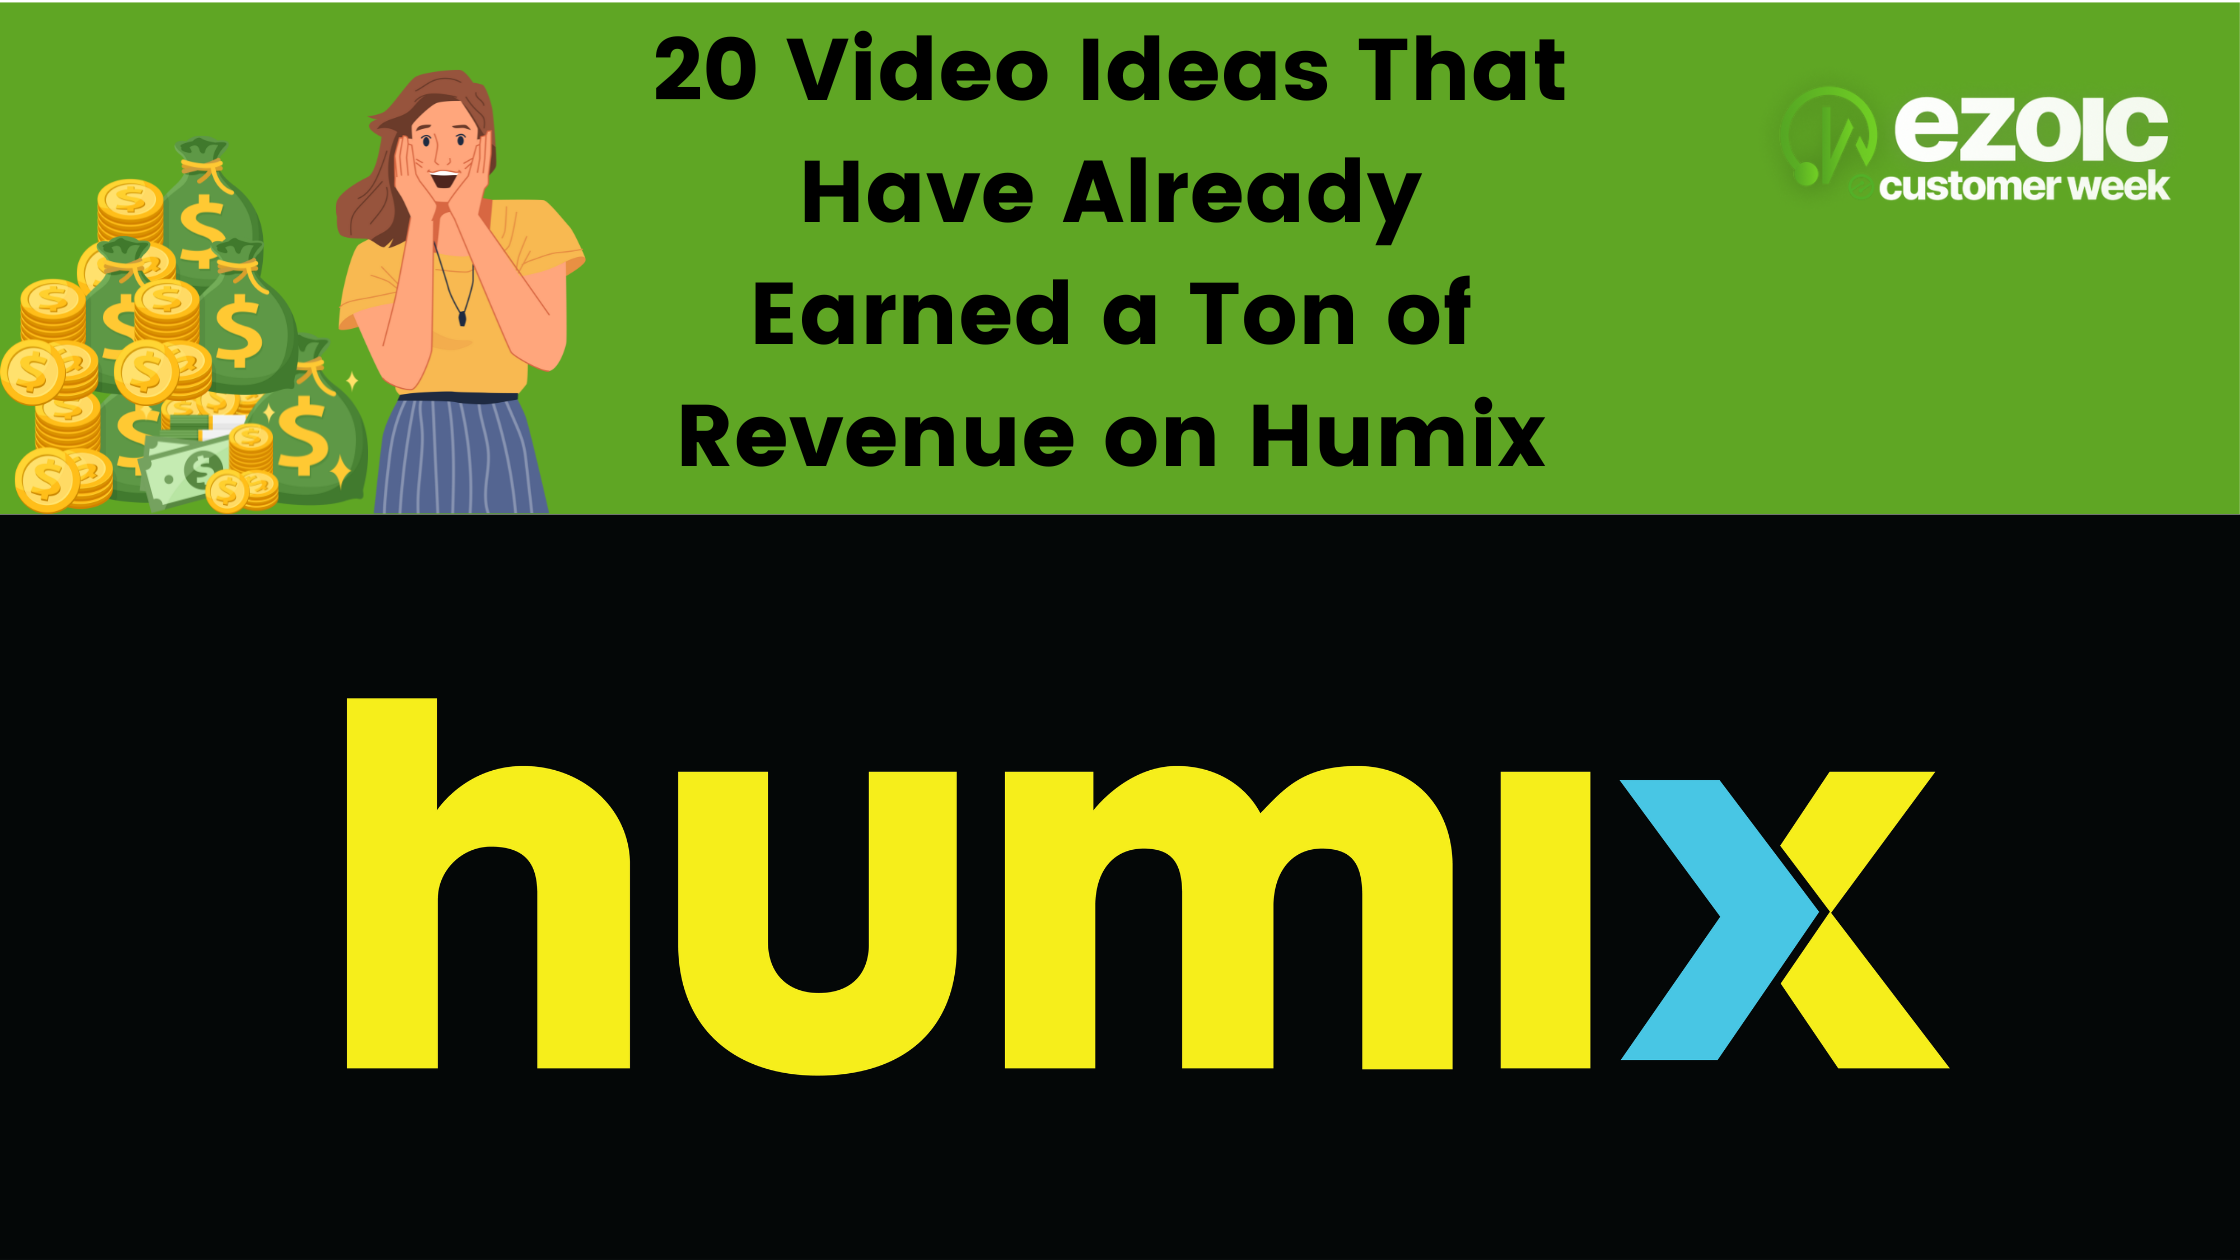 <strong>20 Video Ideas That Have Already Earned a Ton of Revenue on Humix</strong>